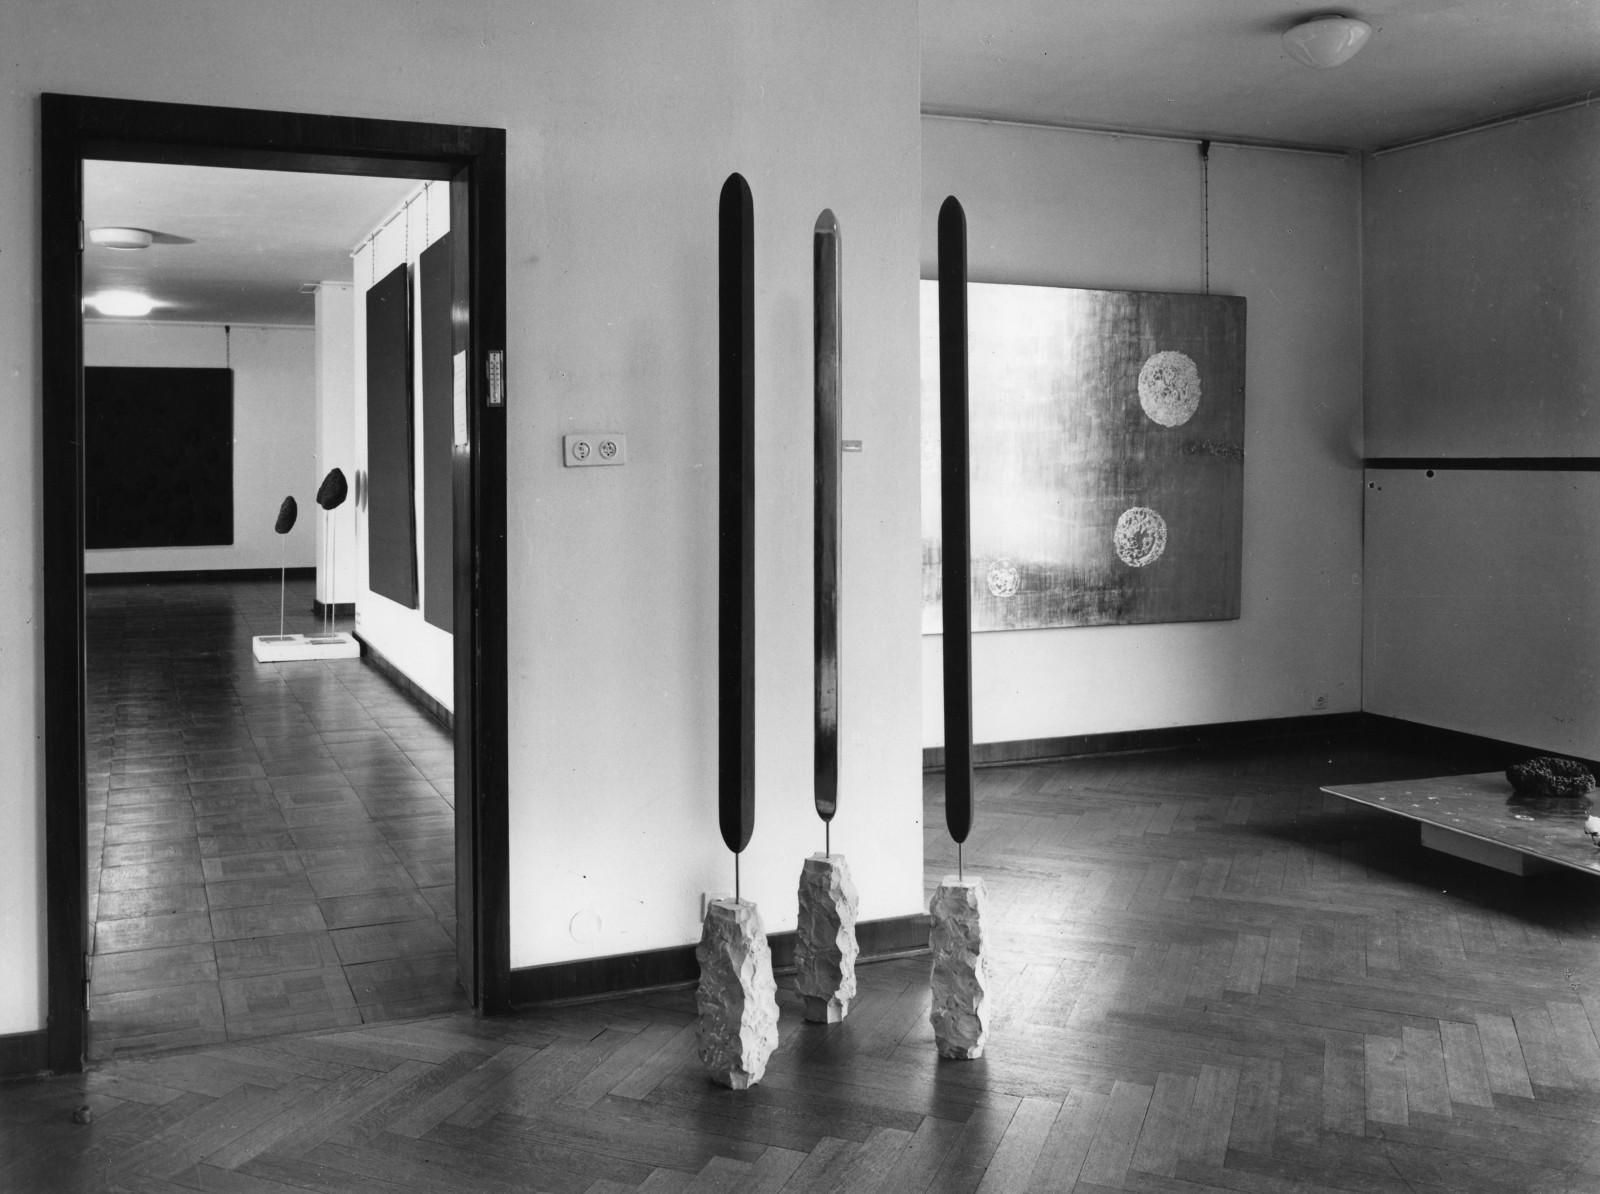 View of the exhibition “Monochrome und Feuer” (MG 17, S 33, S 34, S 35), Museum Haus Lange